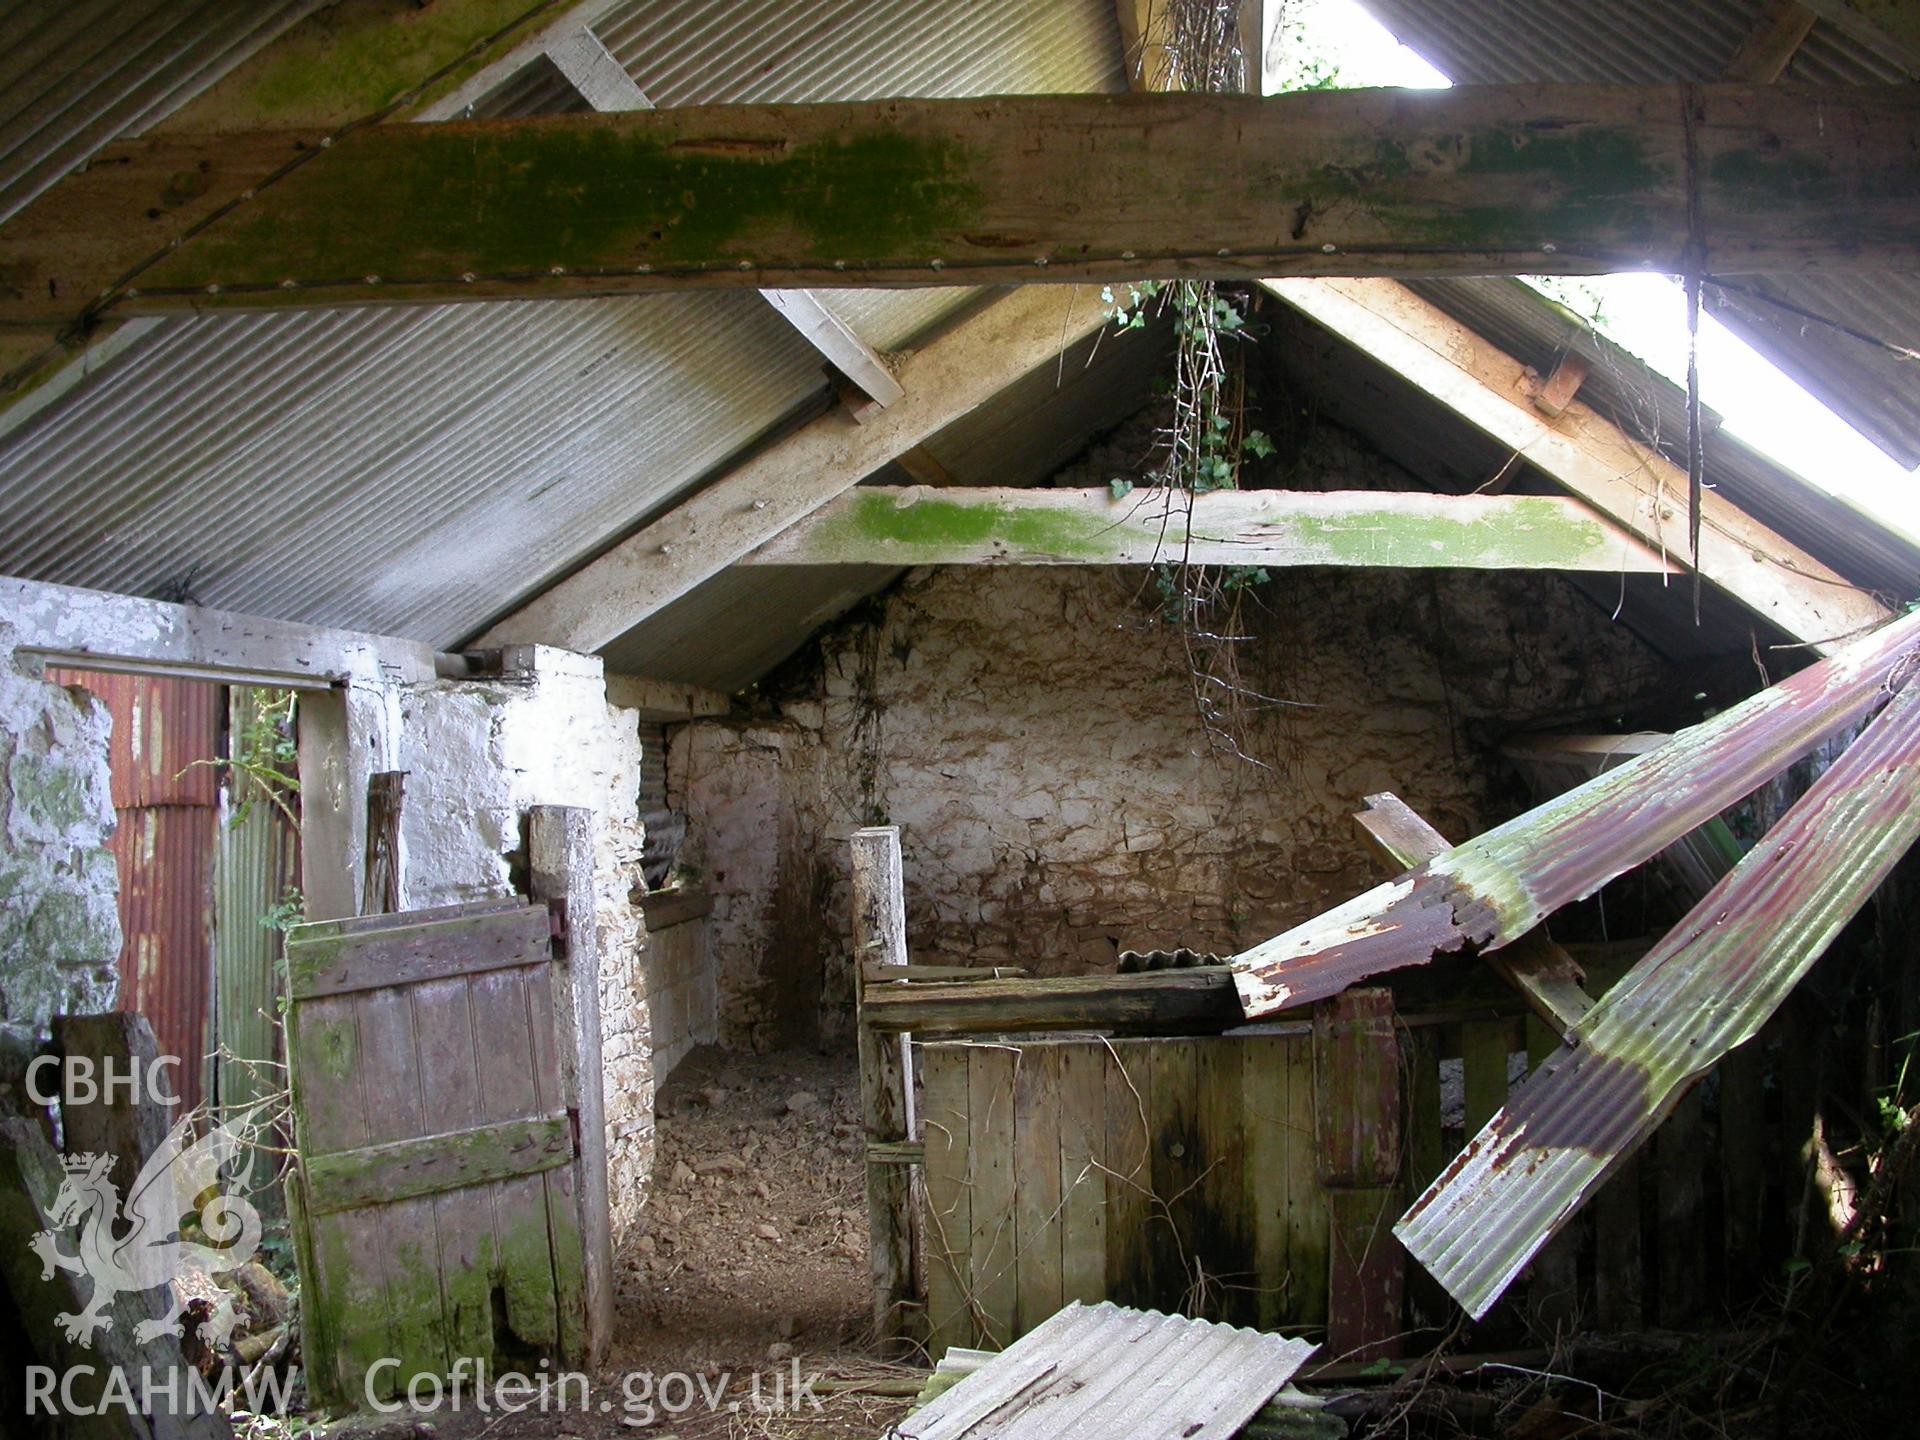 Cattle-house interior.